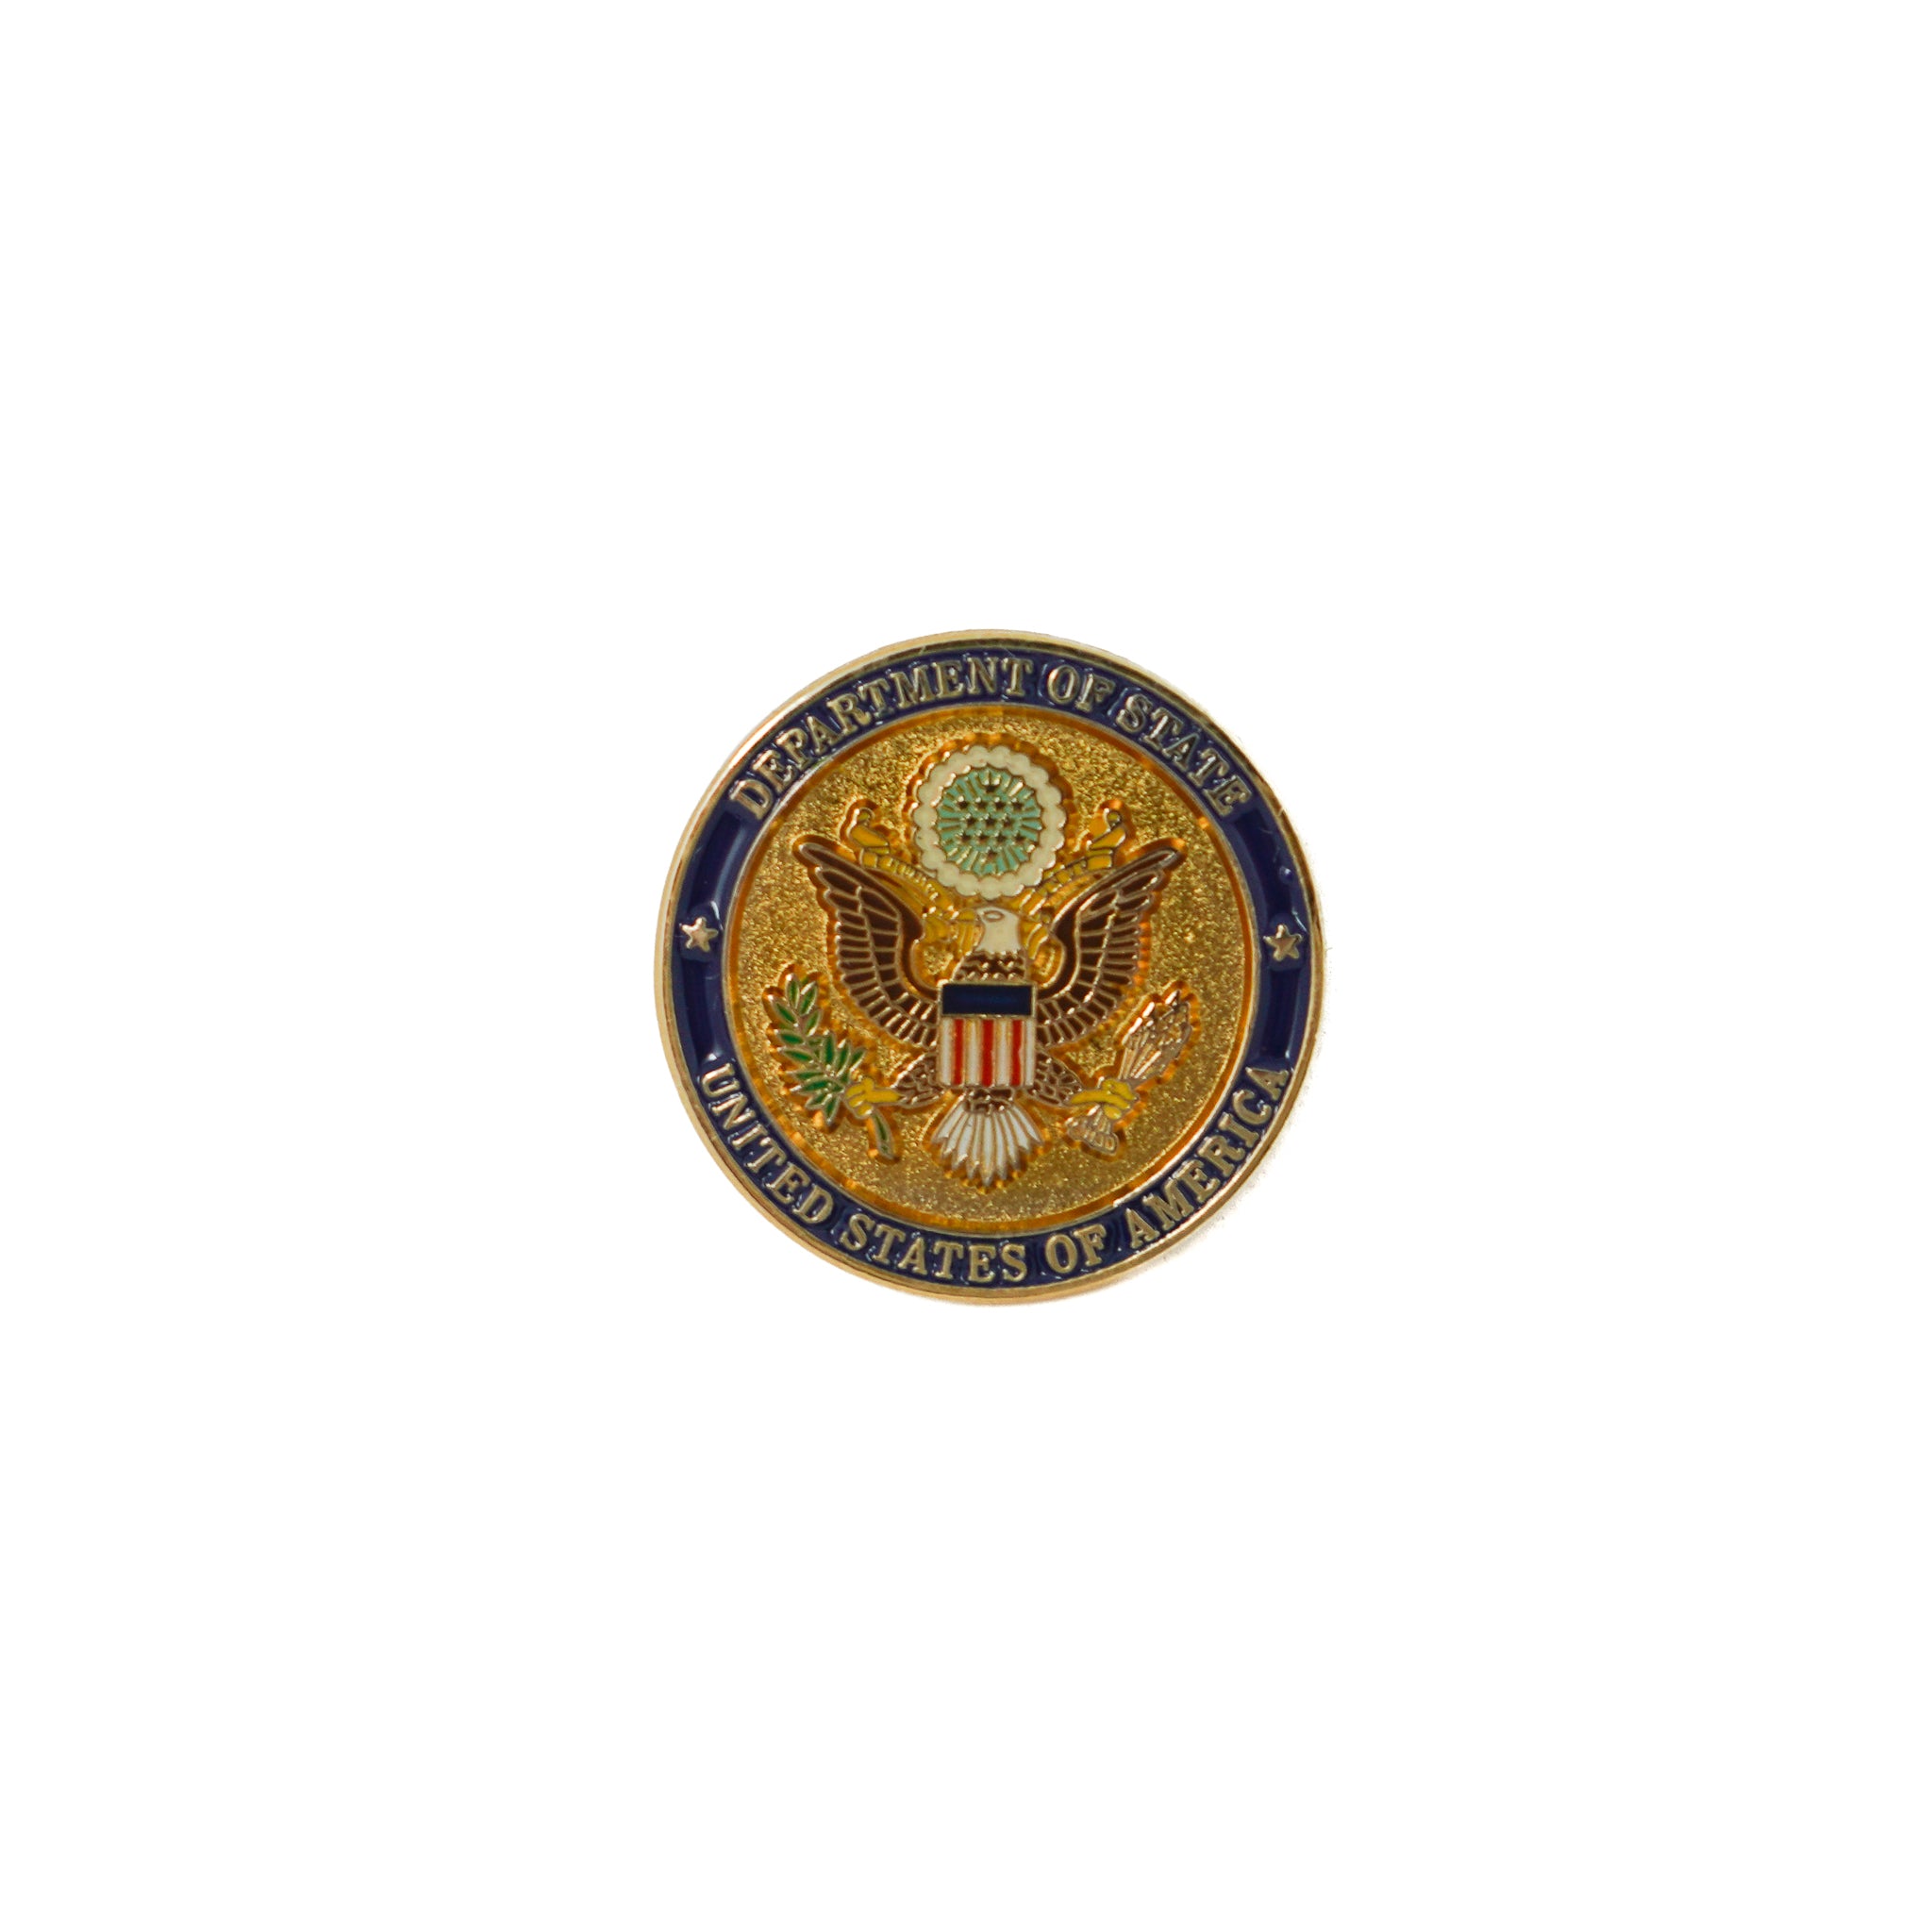 Department Of State Lapel Pin